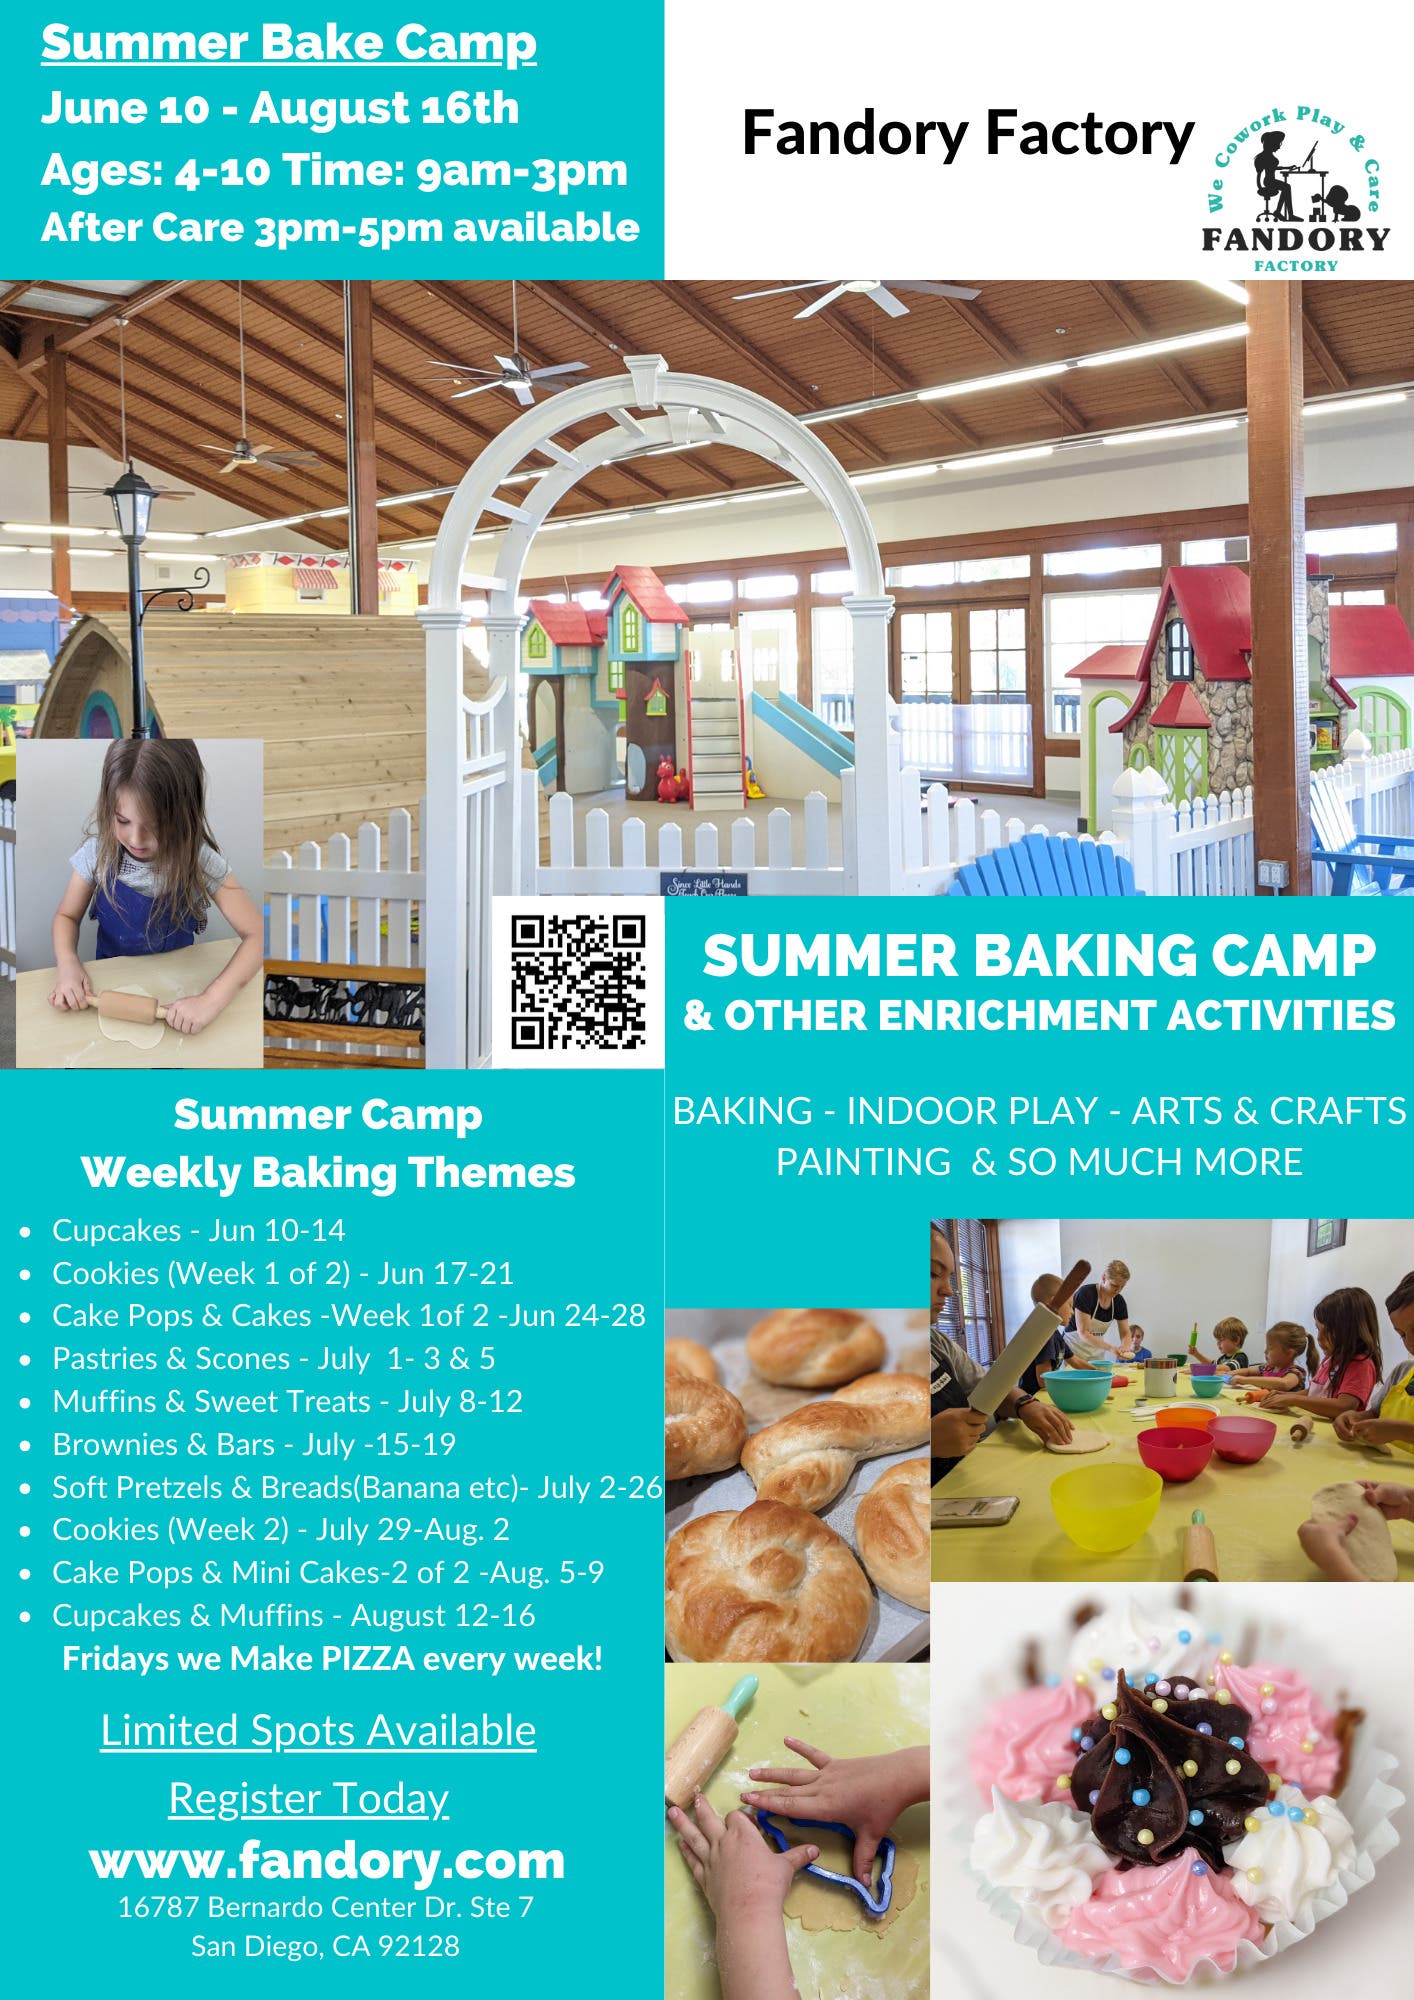 Kids Baking Camp - Cupcakes and Muffins